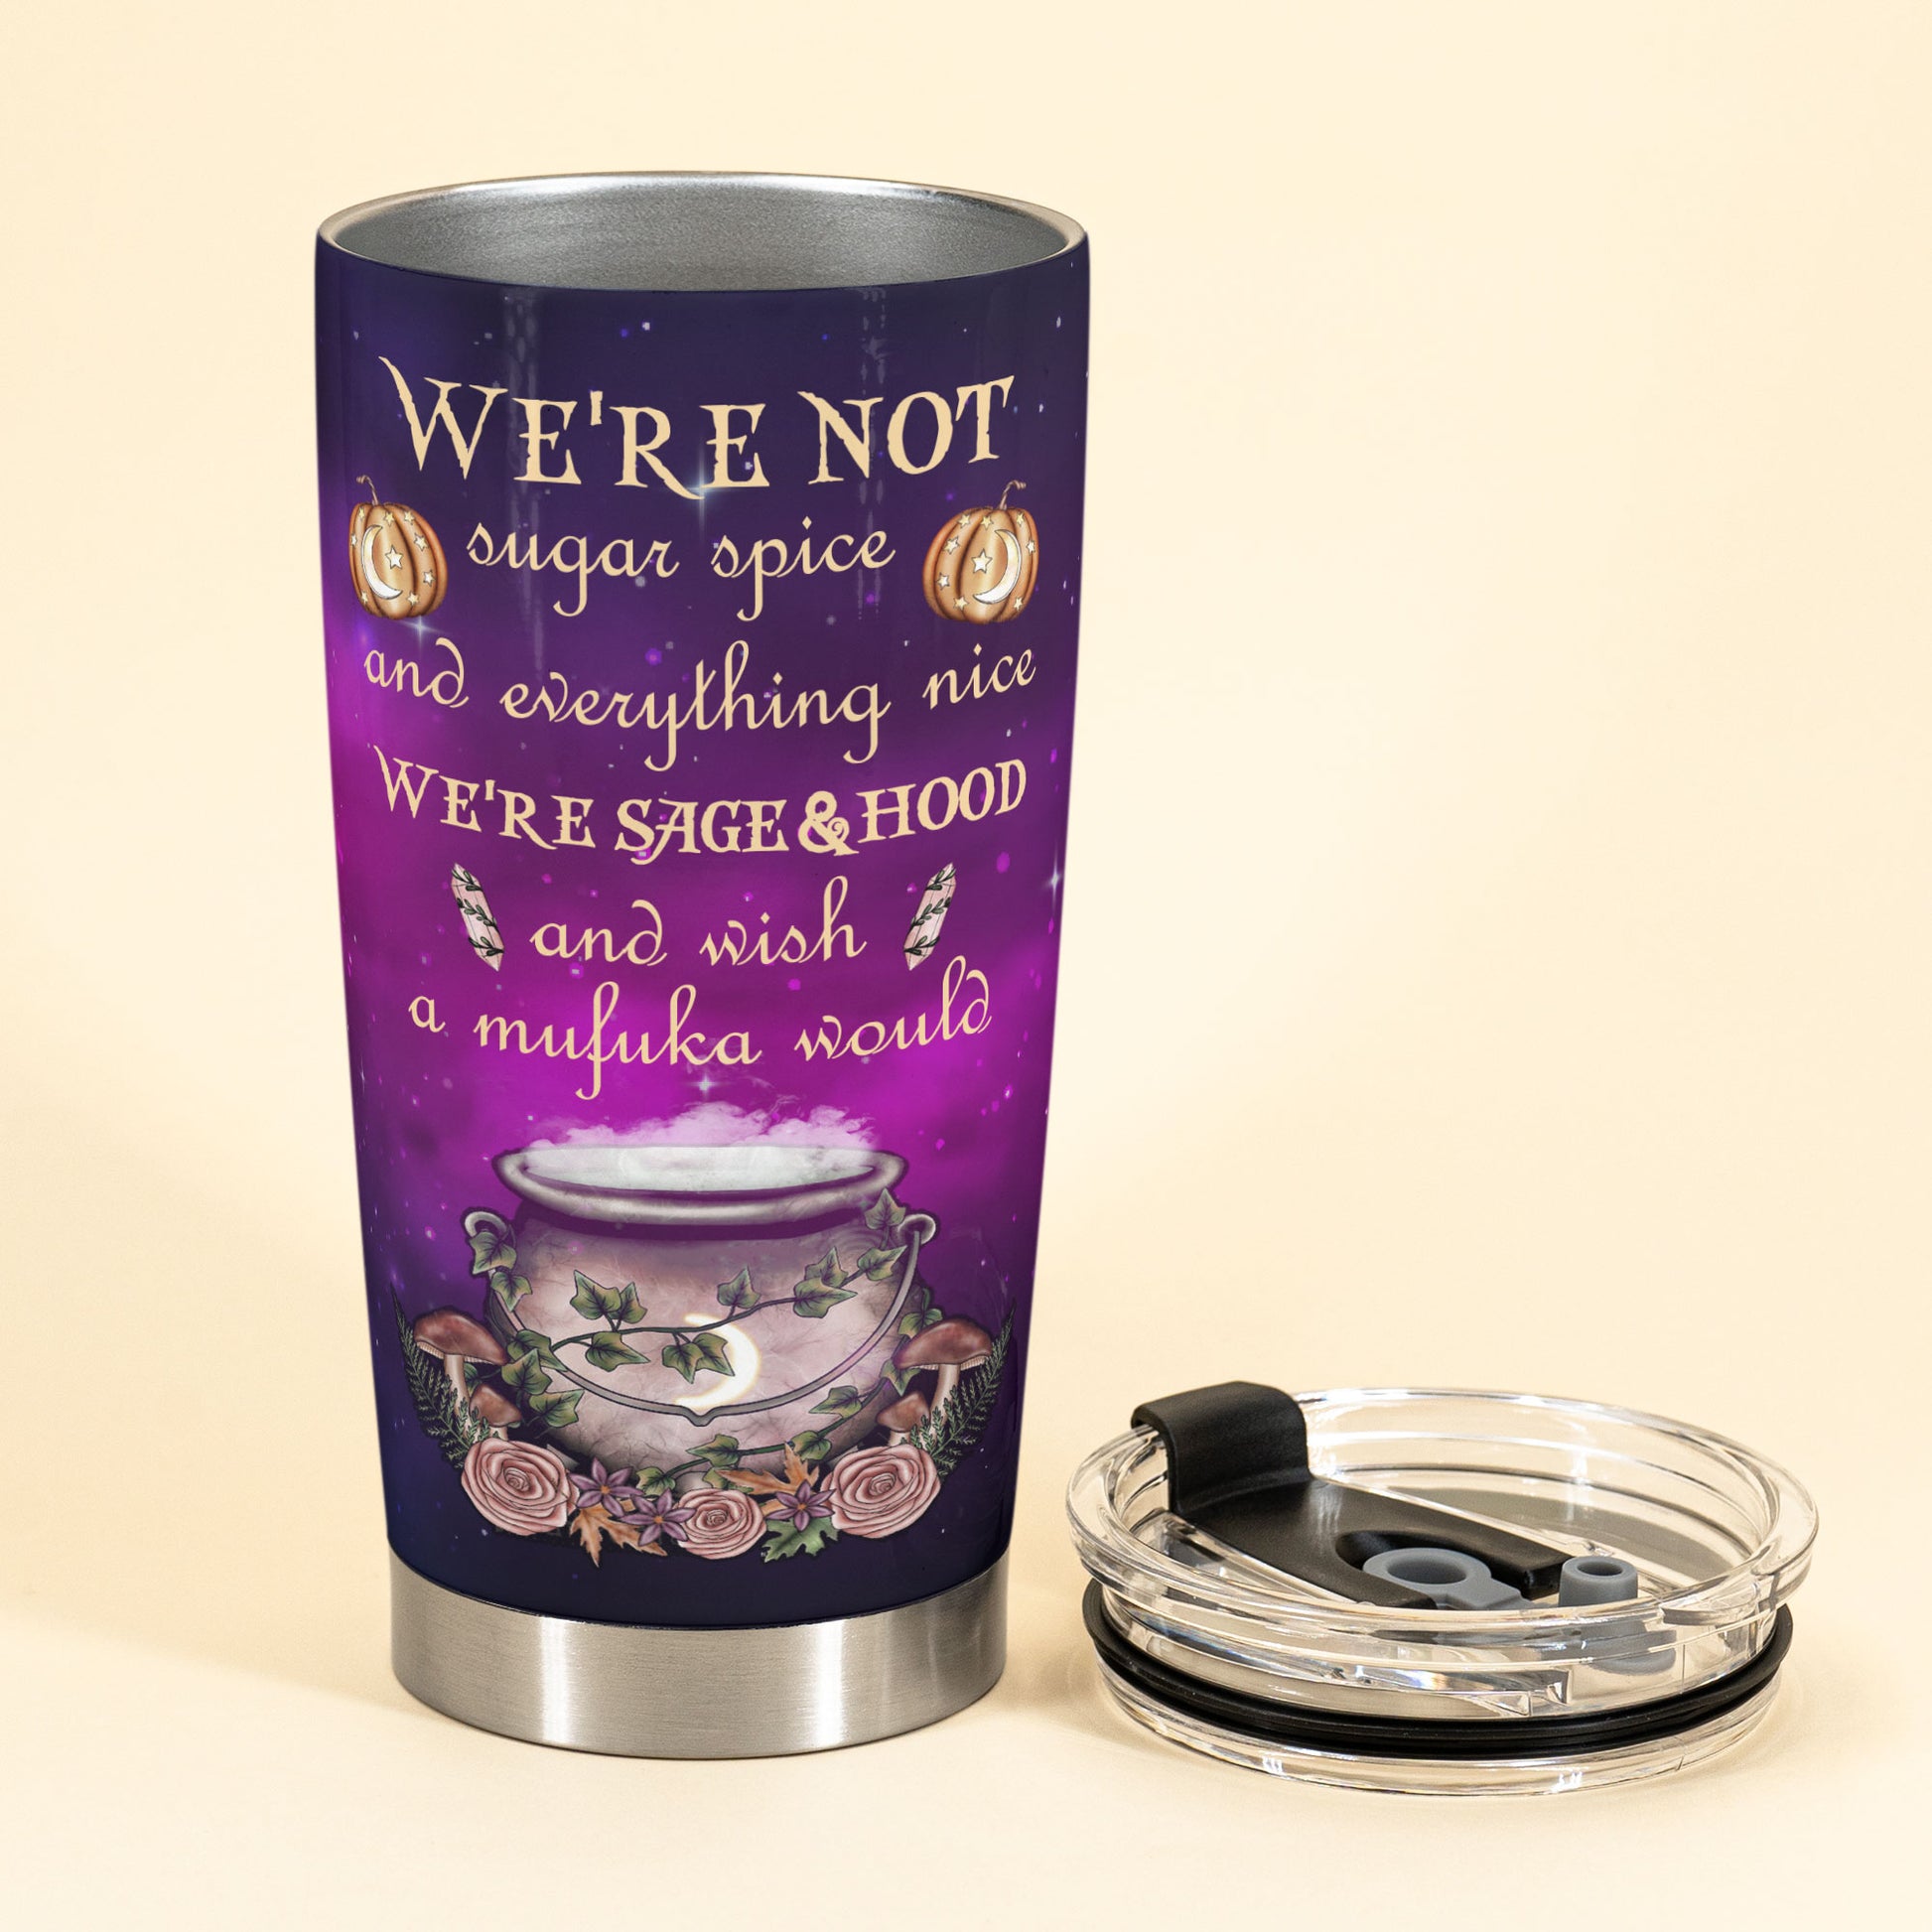 Witches By Nature - Personalized Tumbler Cup - Halloween Gift For Witches